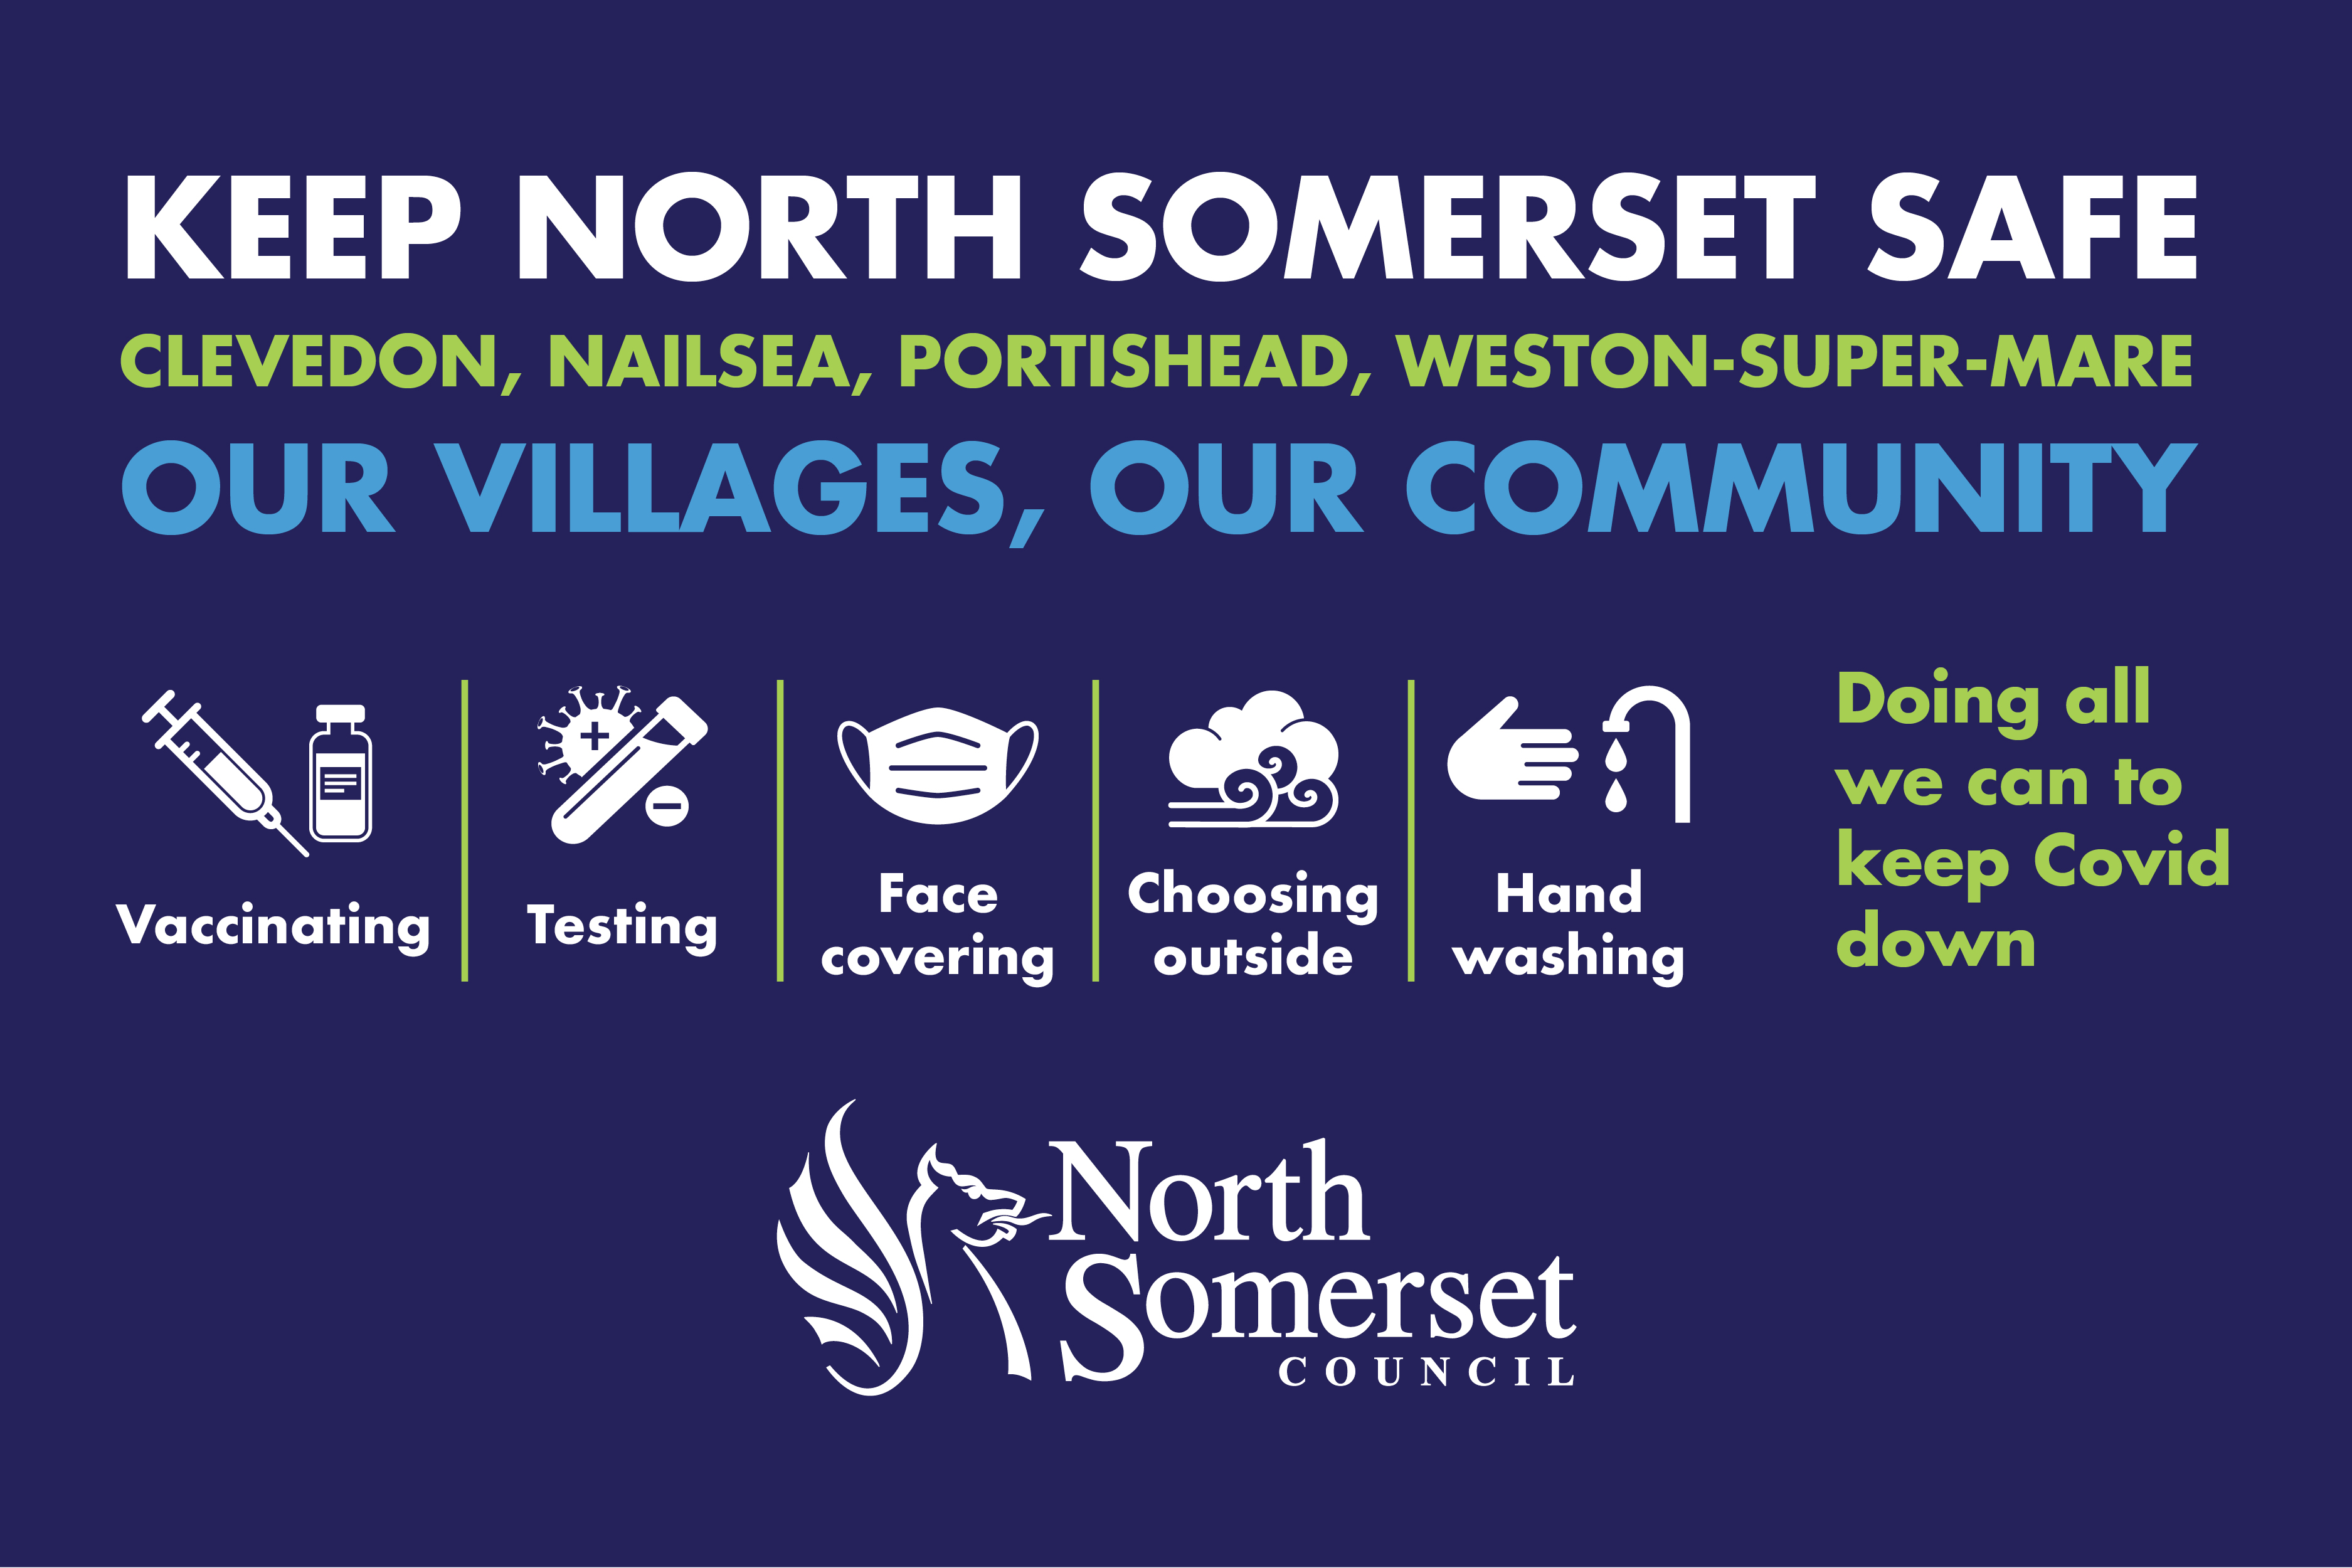 Keep North Somerset safe, Clevedon, Nailsea, Portishead, Weston-super-Mare, doing all we can to keep COVID down with icons showing vaccinations, testing, face coverings, staying outside, and hand washing